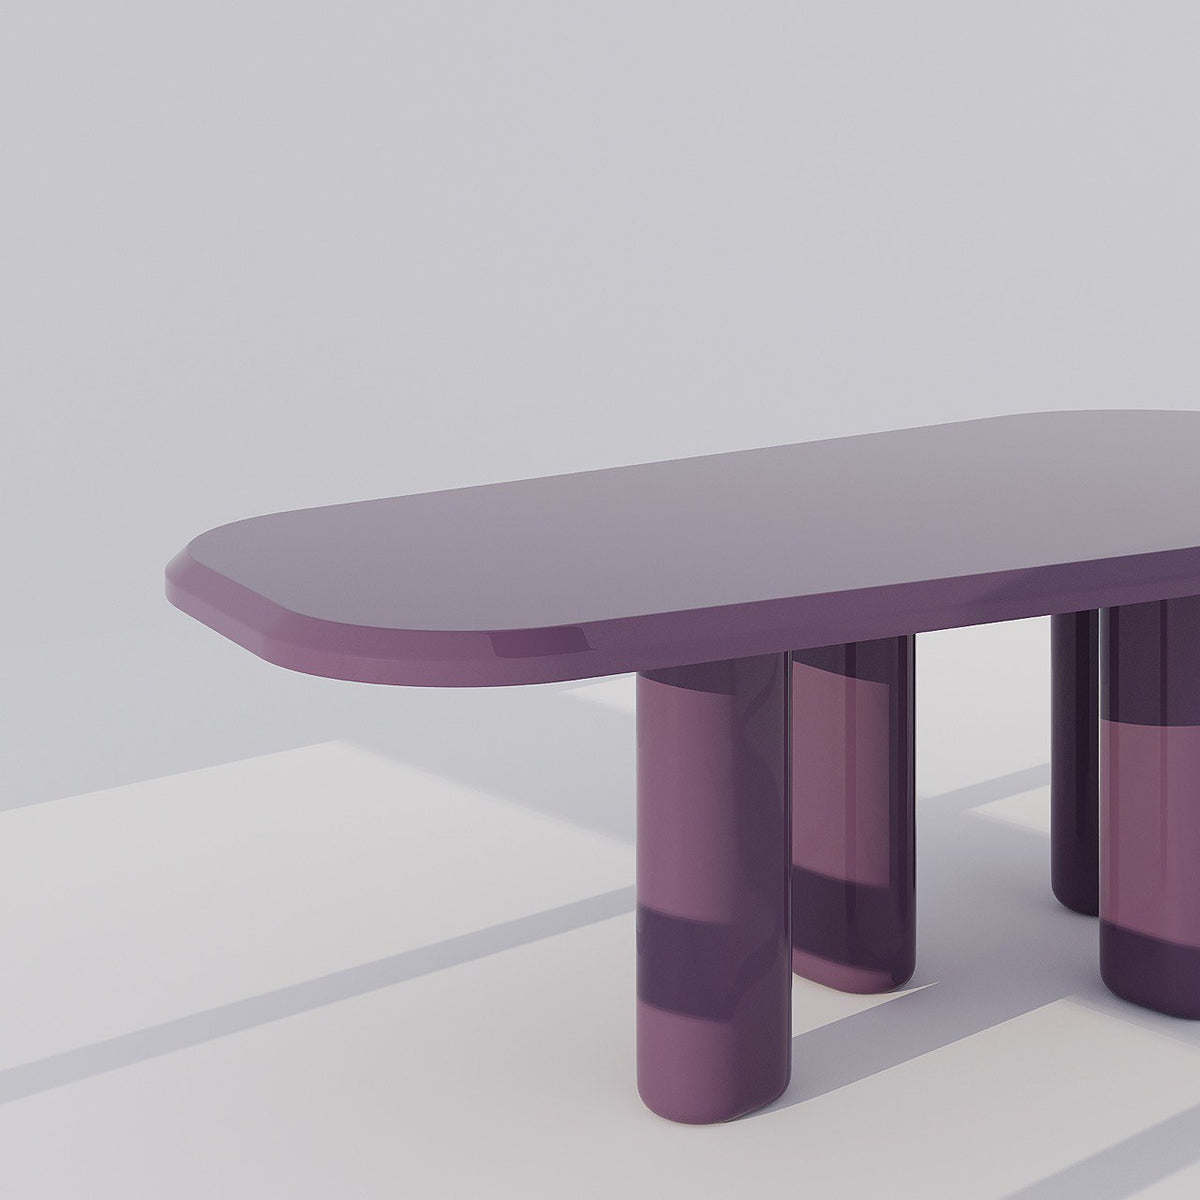 The Zen Dining Table / Spring